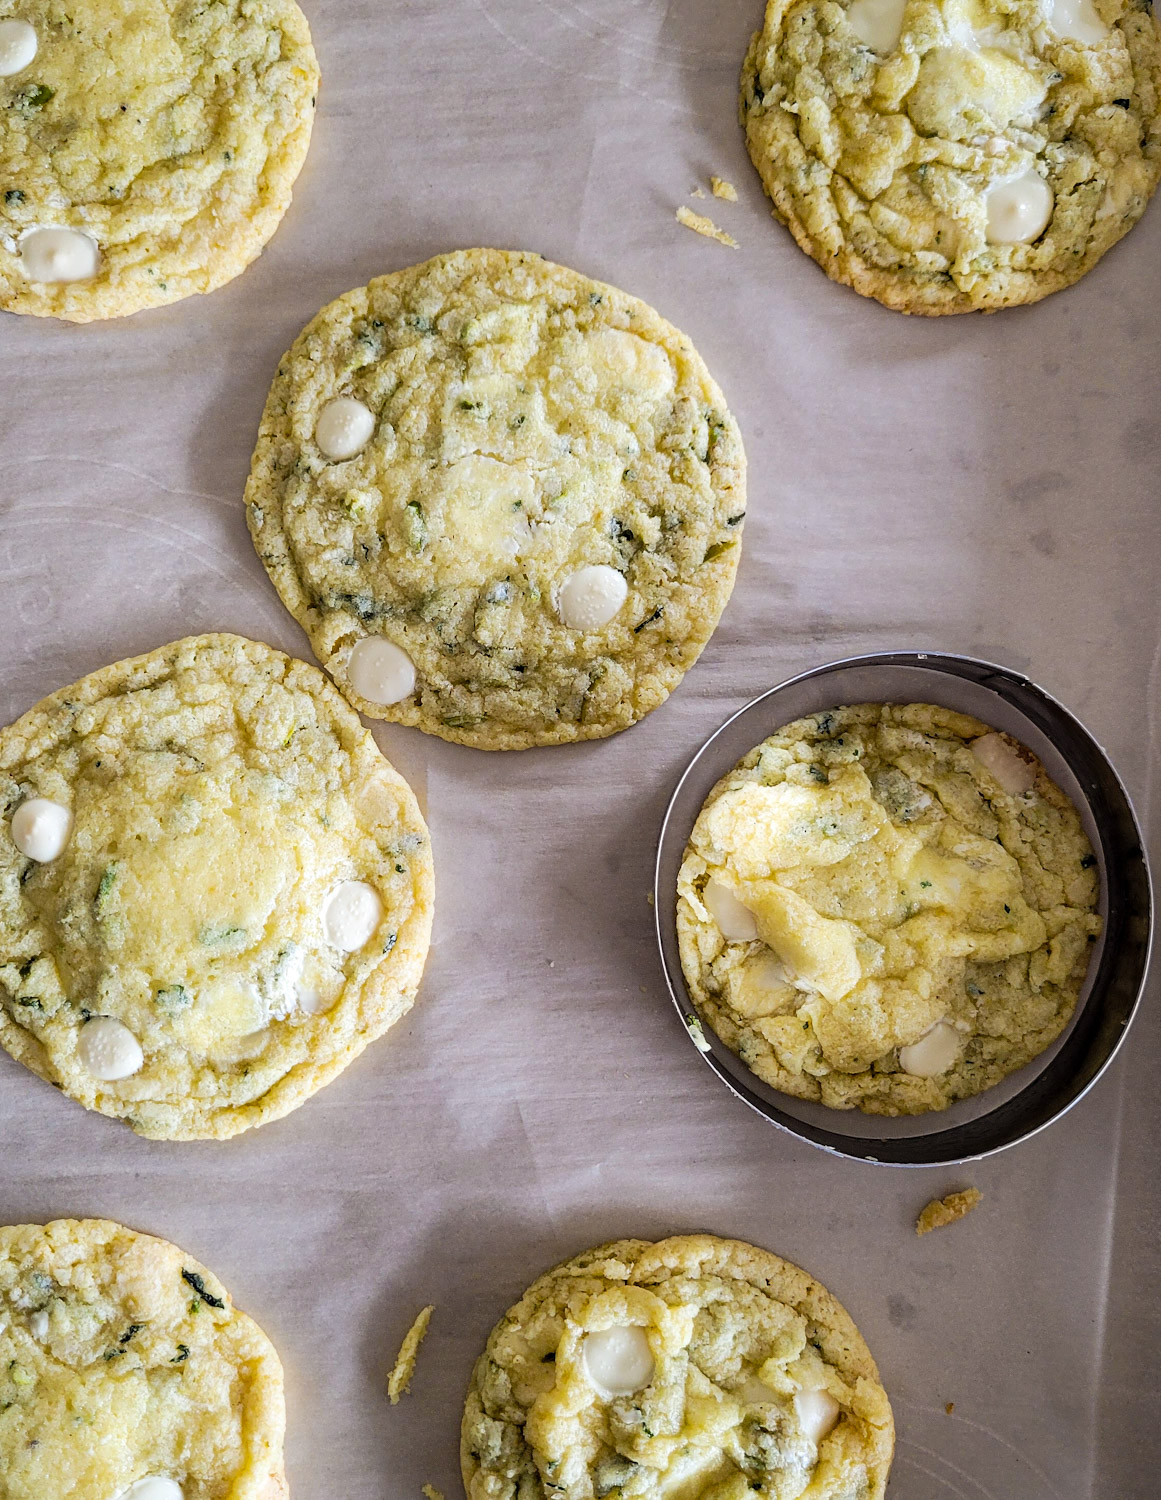 Spinning a biscuit cutter around freshly baked Lemon Basil Cookies with White Chocolate and Pistachios to make them round.